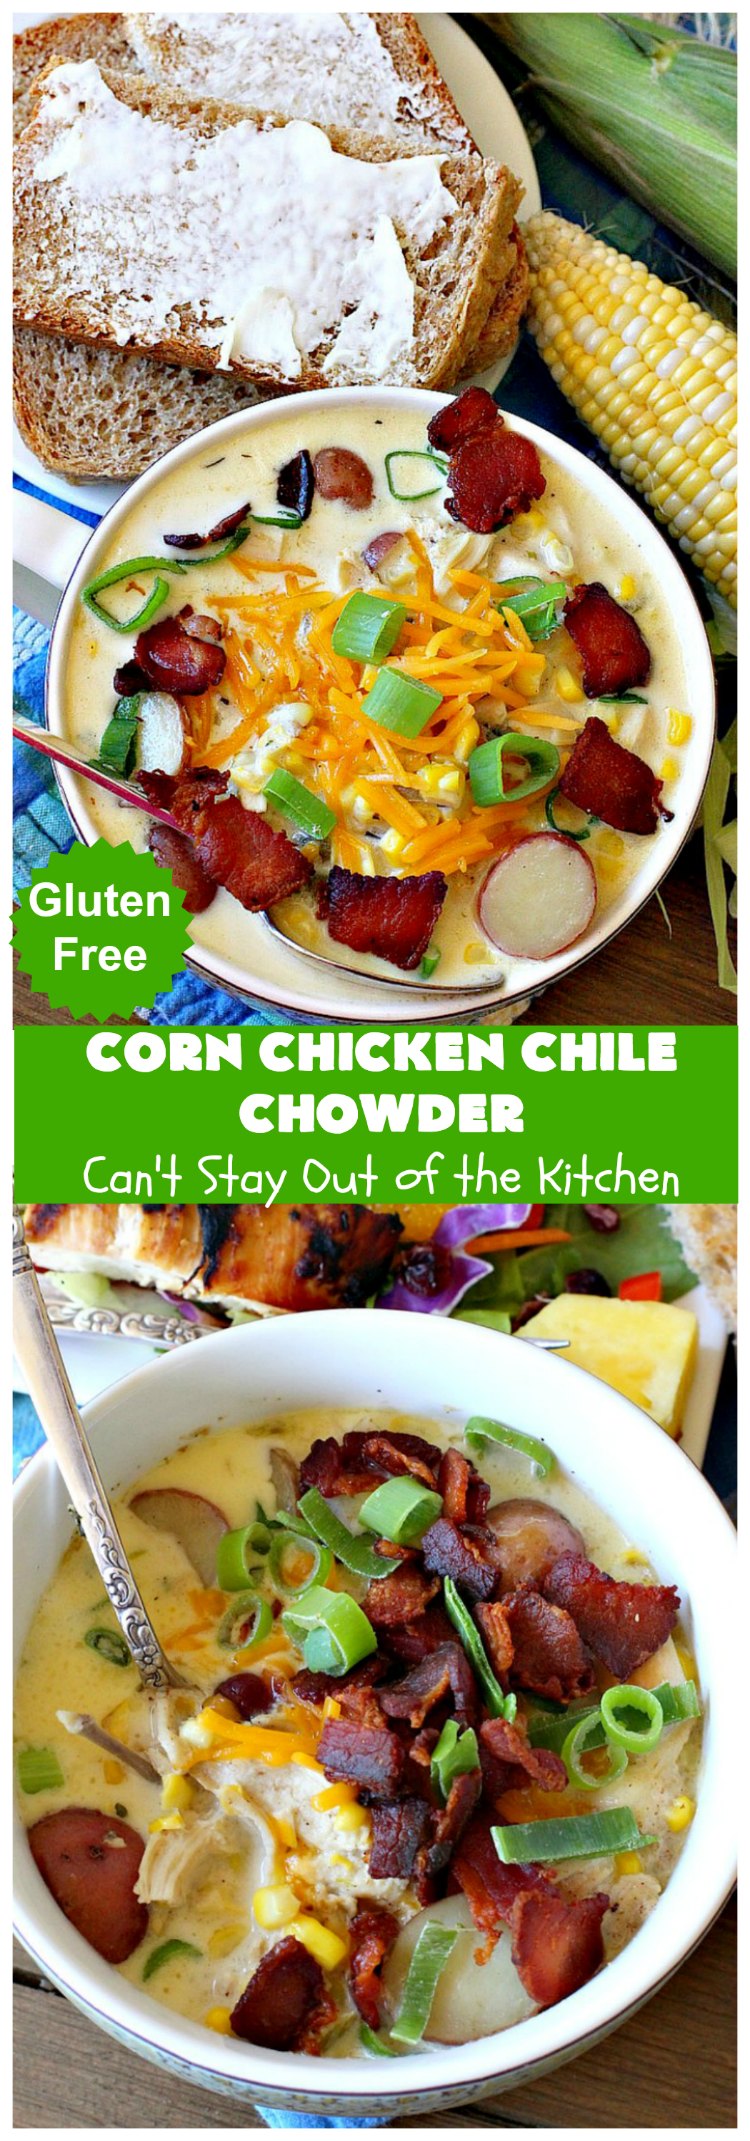 Corn Chicken Chile Chowder | Can't Stay Out of the Kitchen